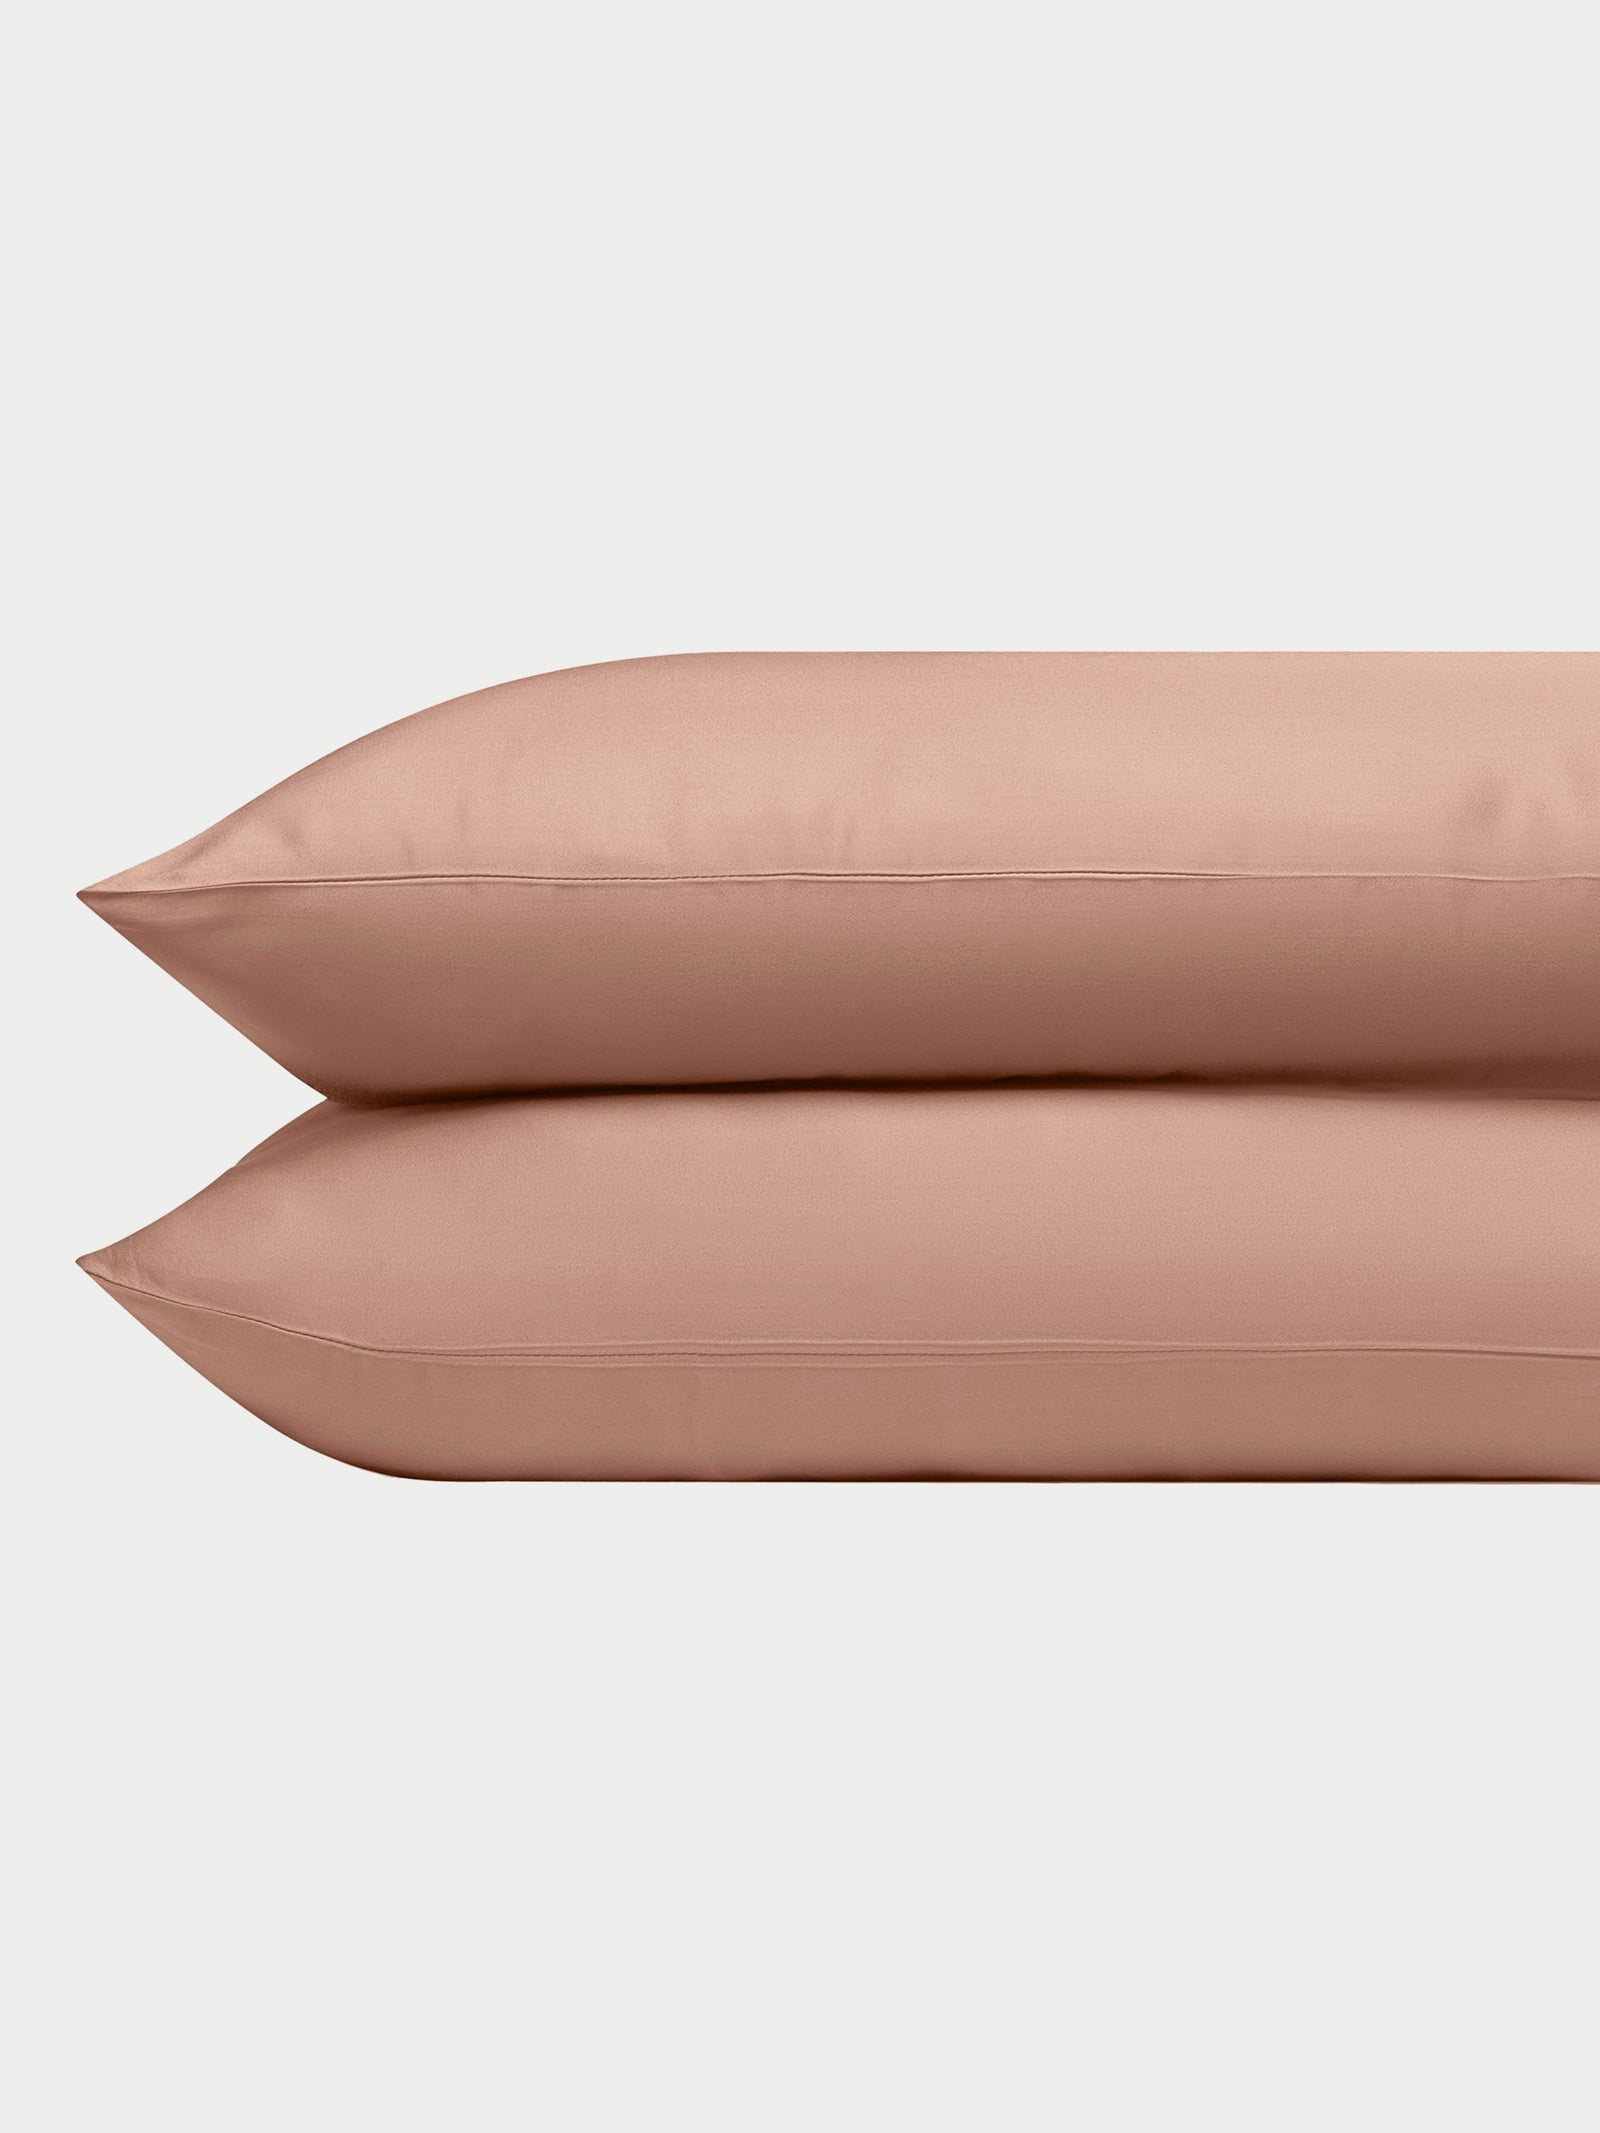 Two clay pillowcases with a plain background standard/king/body